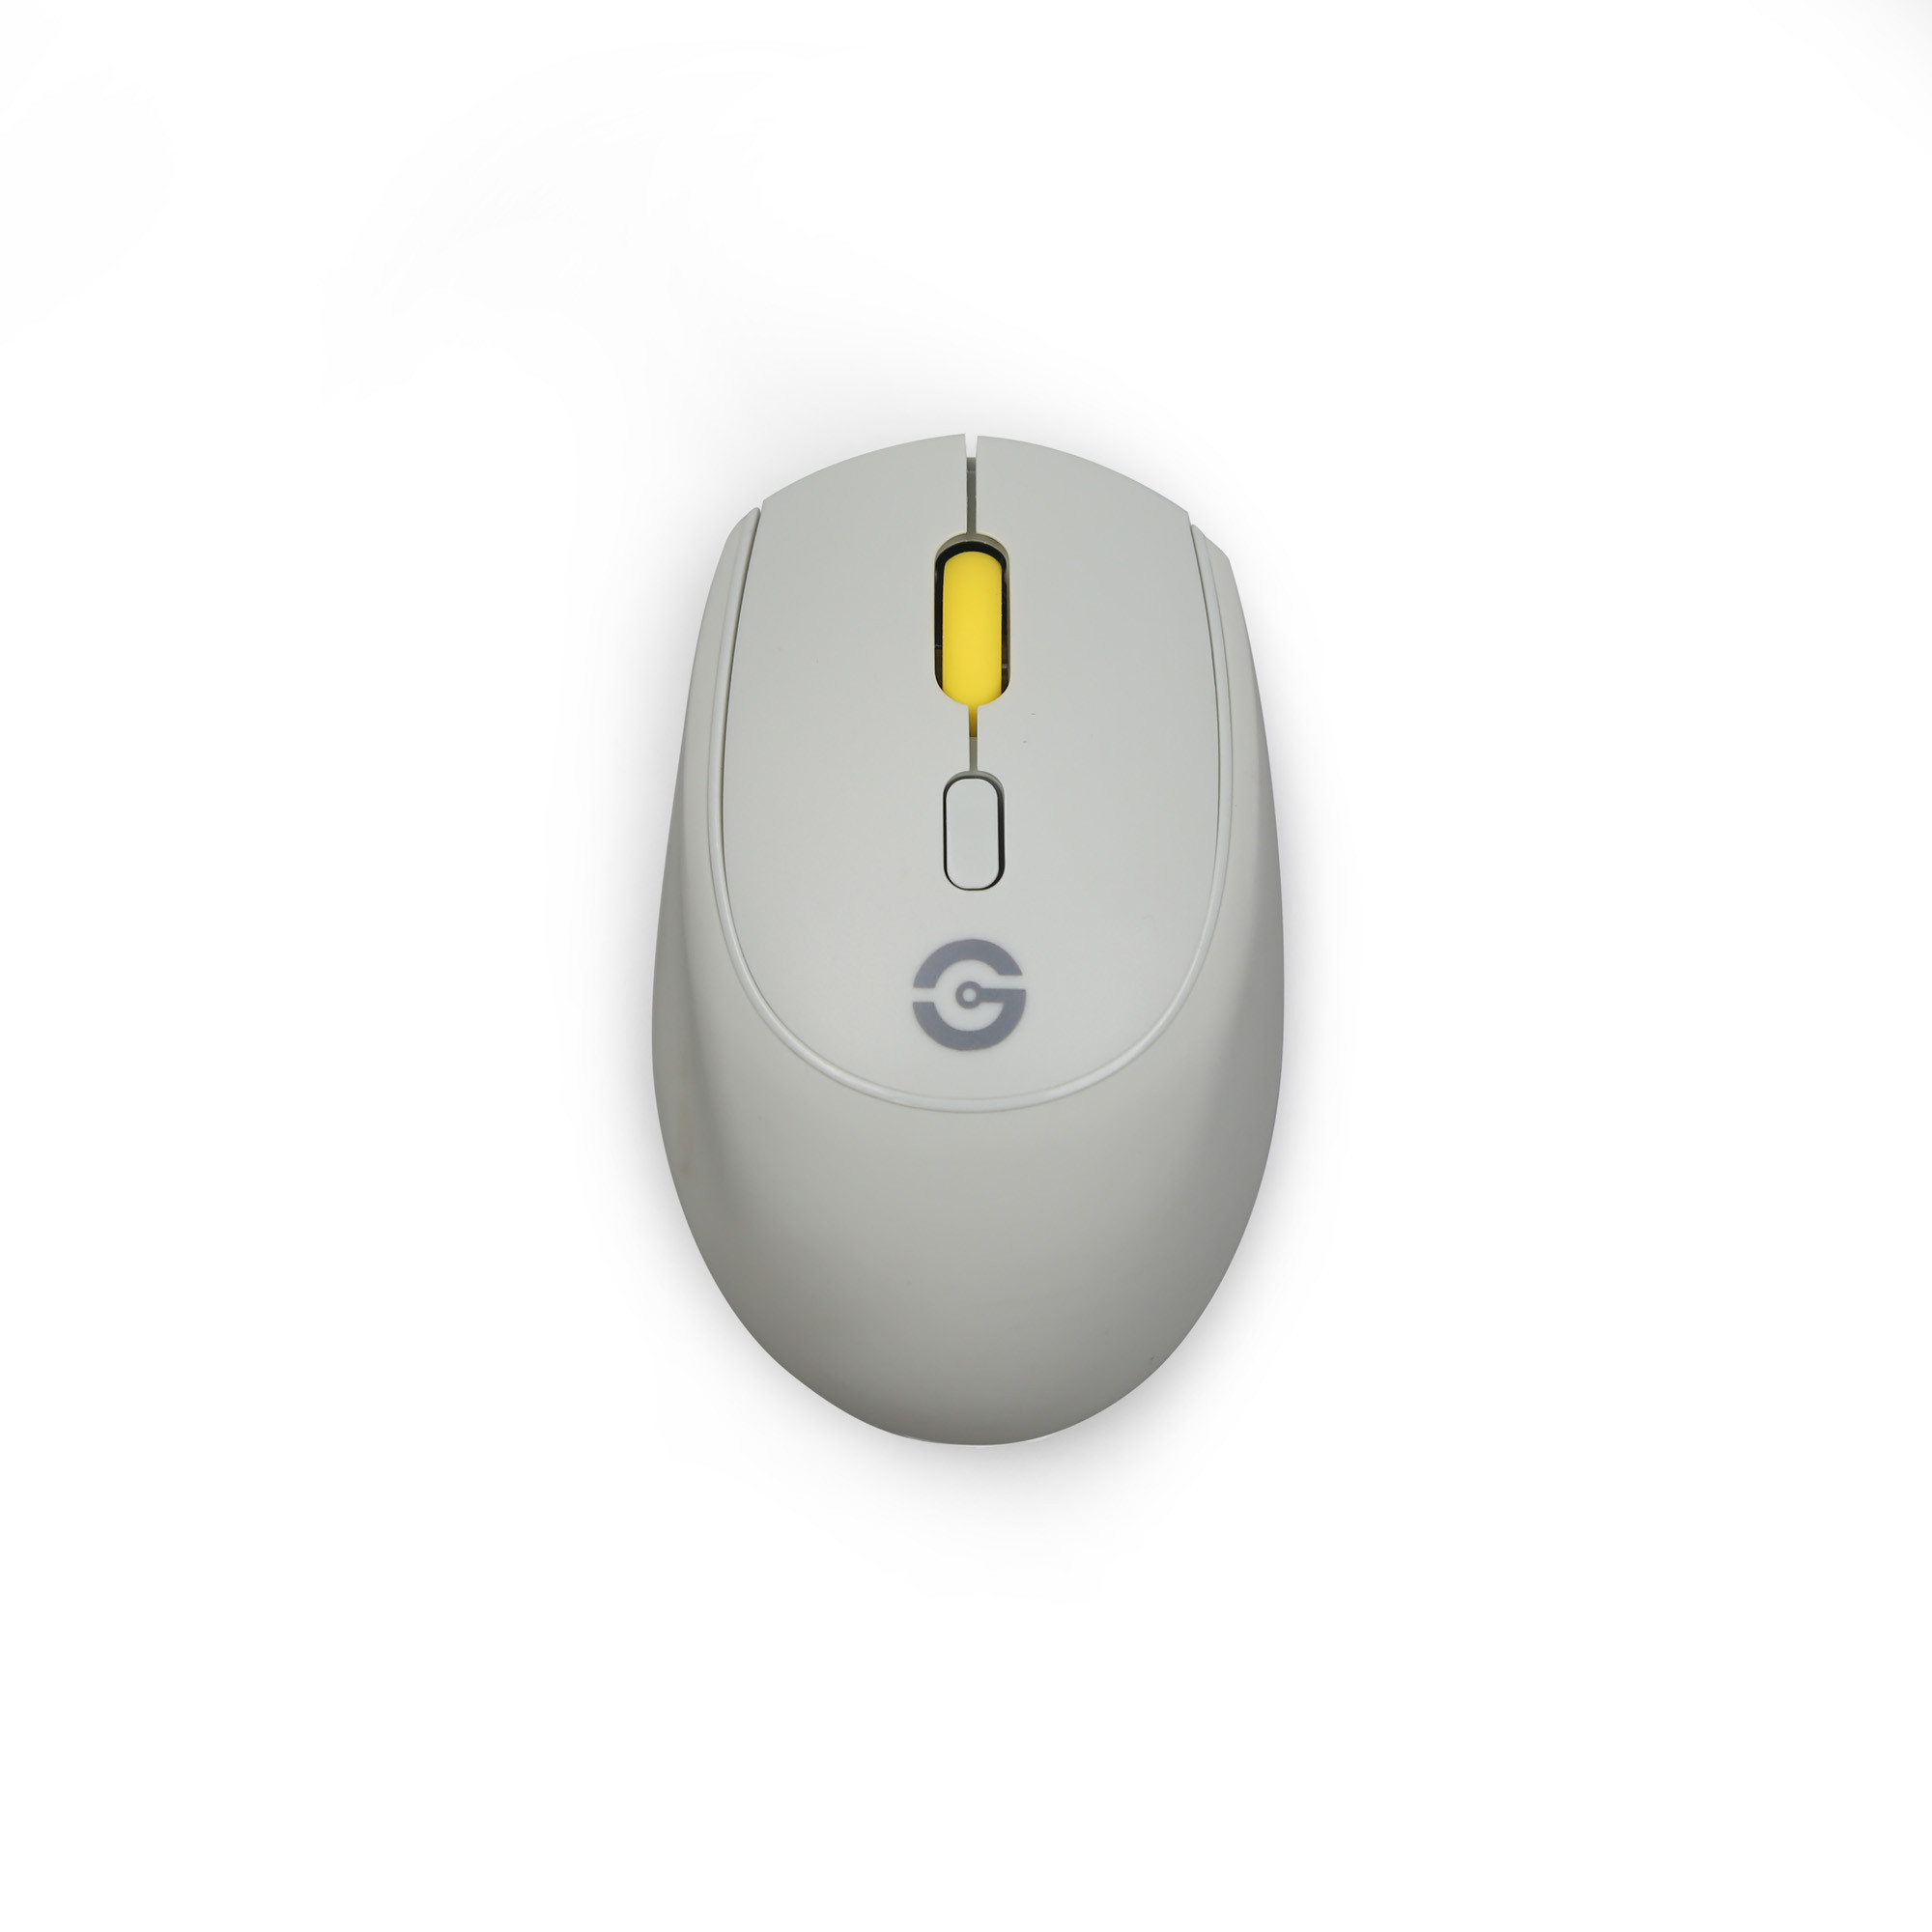 Mouse Wireless Getttech Gac 24407G Colorful Gris - GAC-24407G